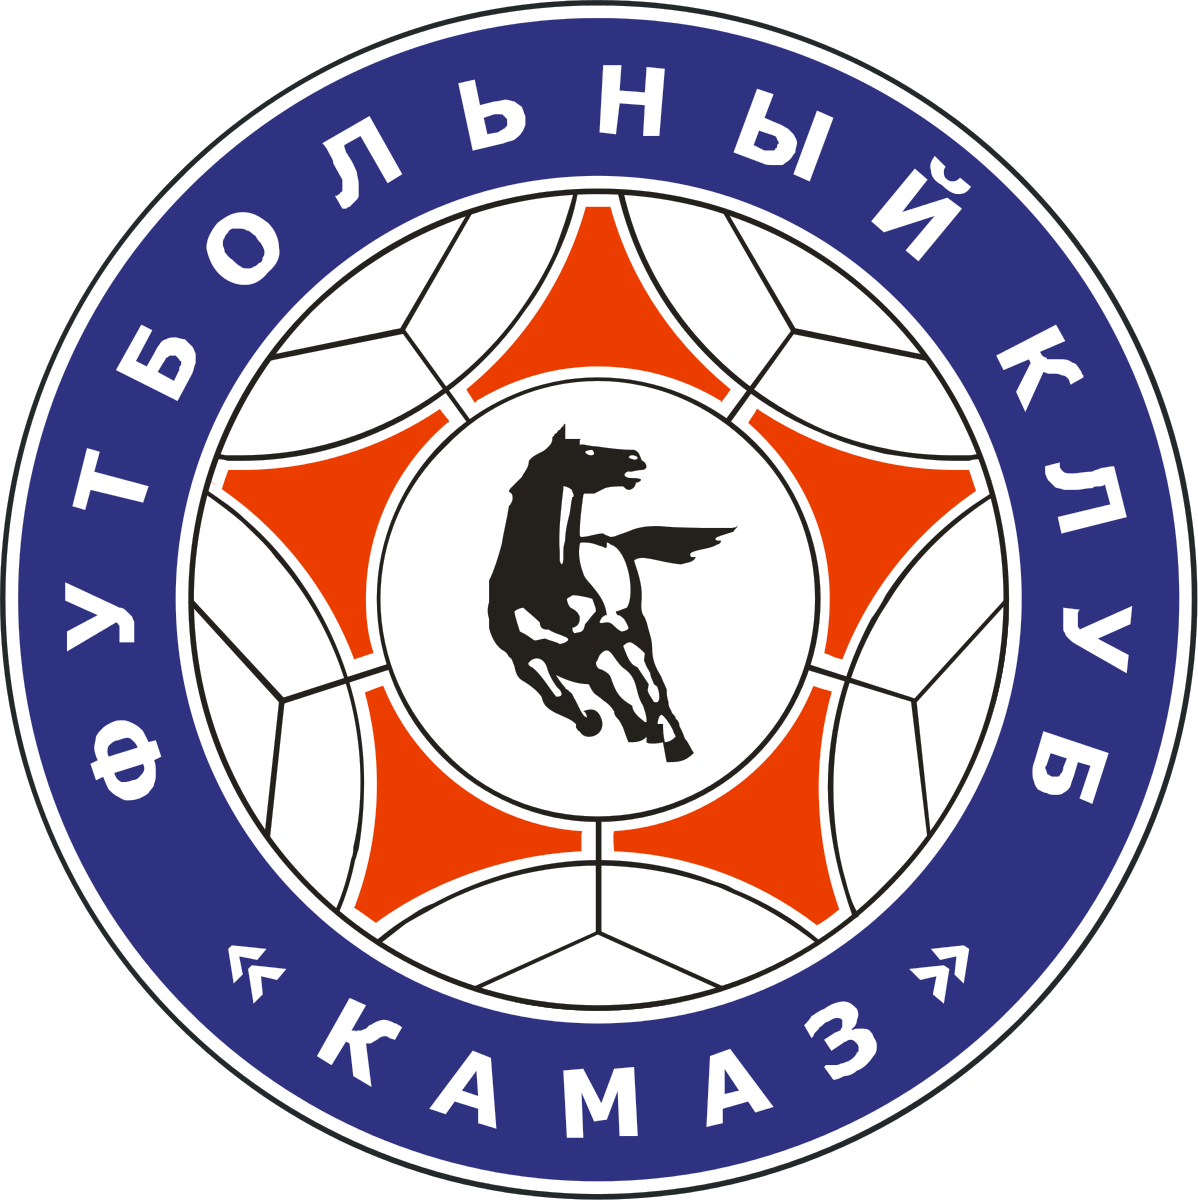 Club logo KAMAZ the one who participates in the event